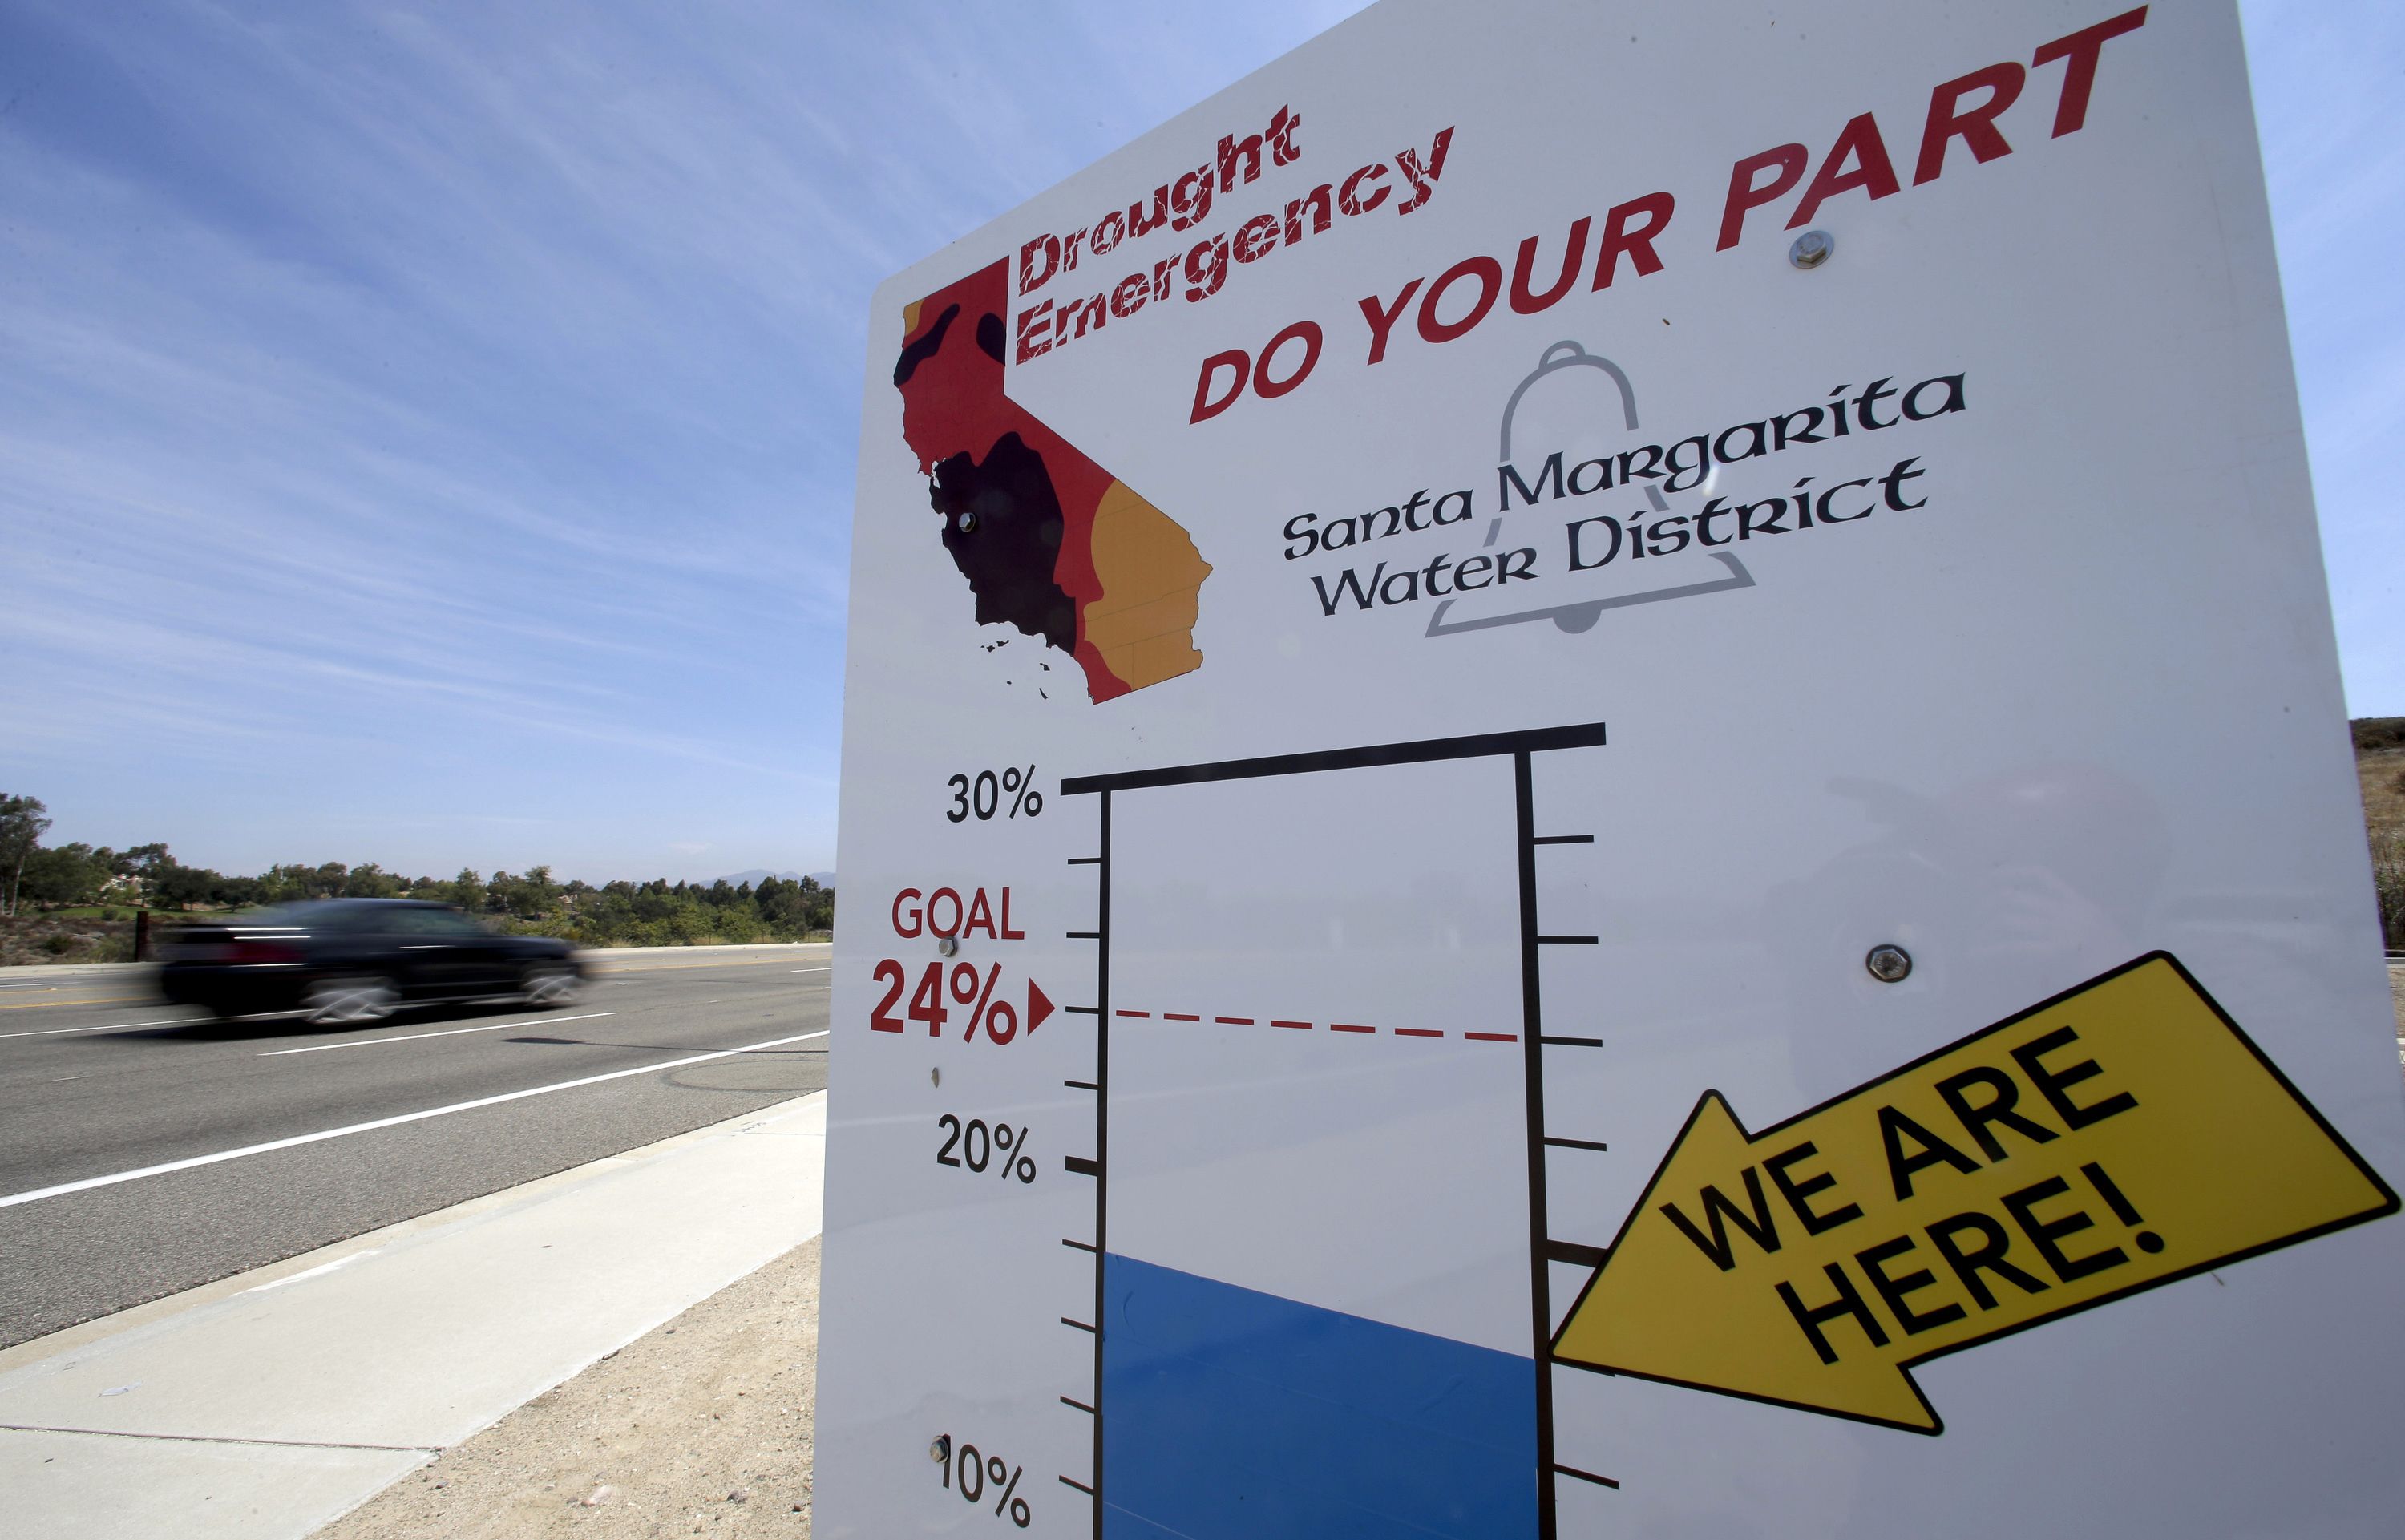 Cars in Rancho Santa Margarita, Calif., drive by a sign encouraging residents to save water, July 2, 2015.